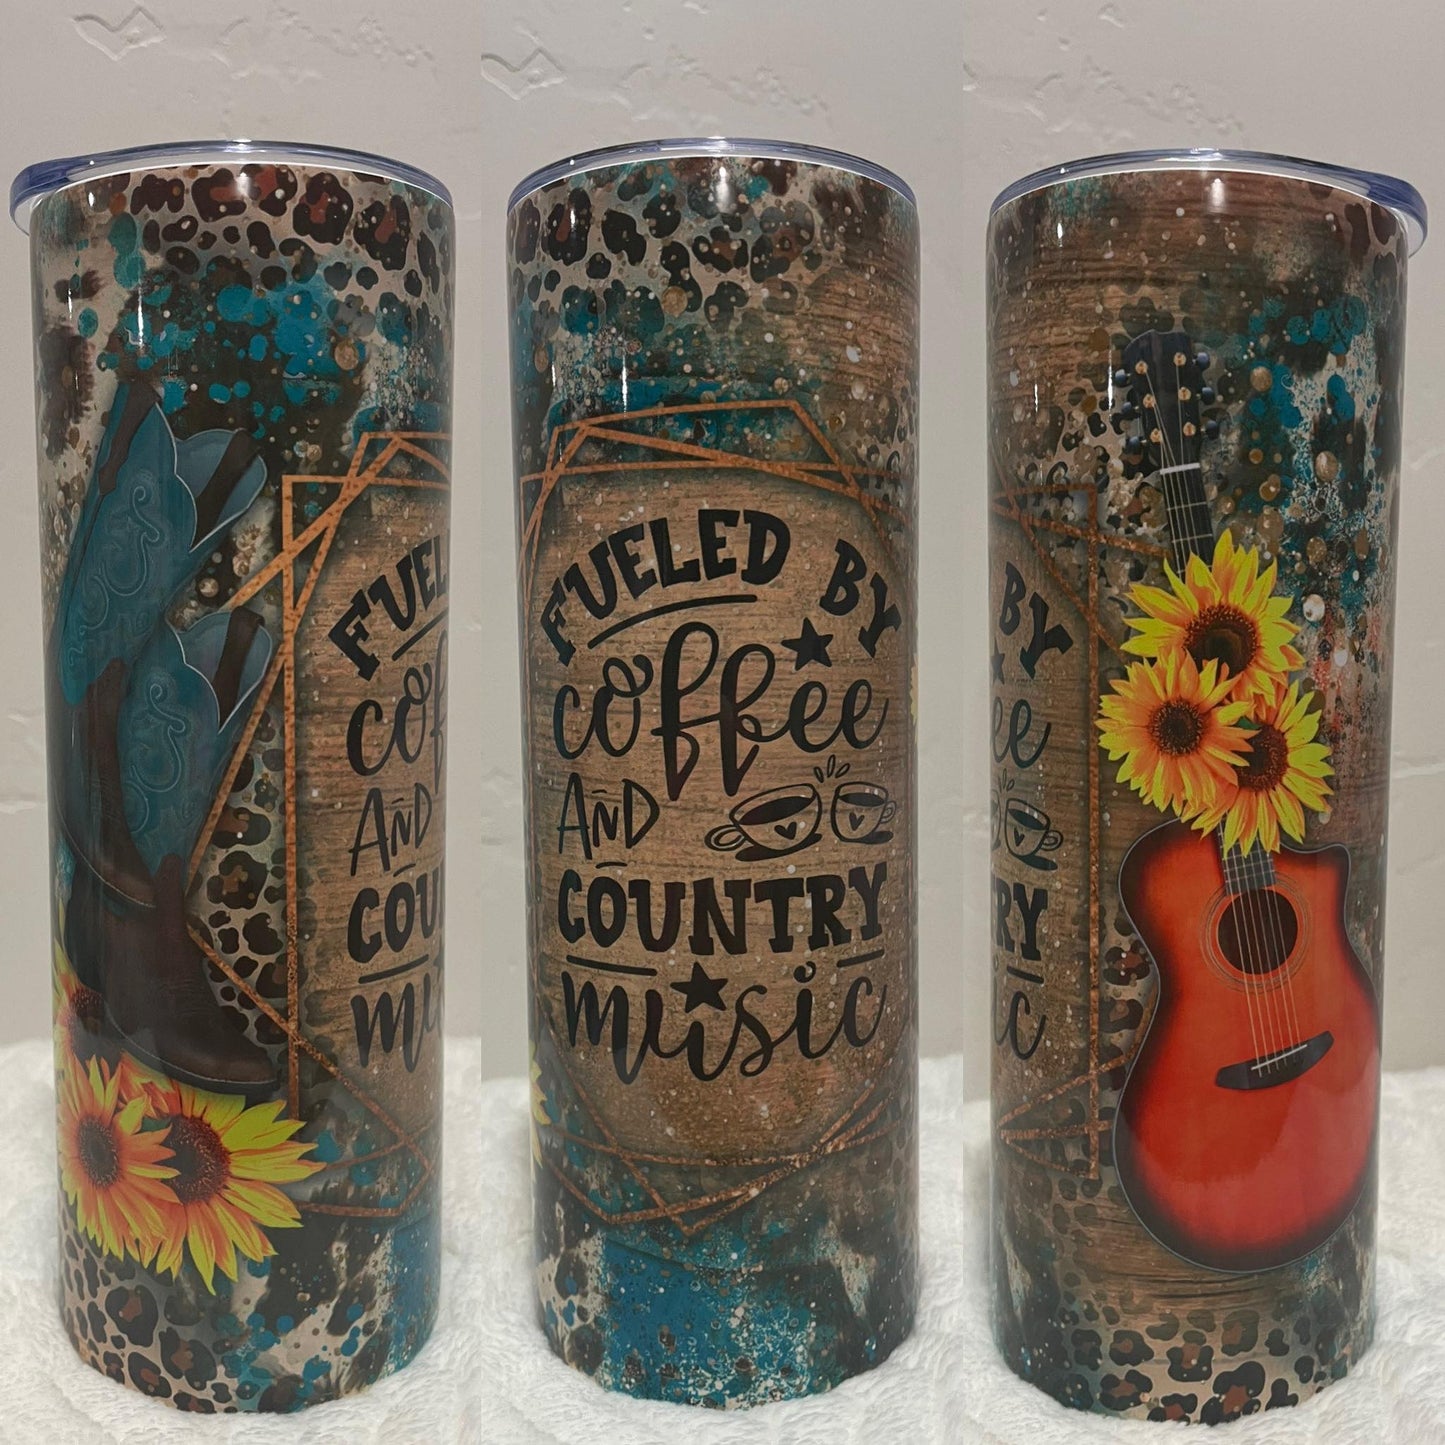 Fueled by Coffee and Country Music Tumbler